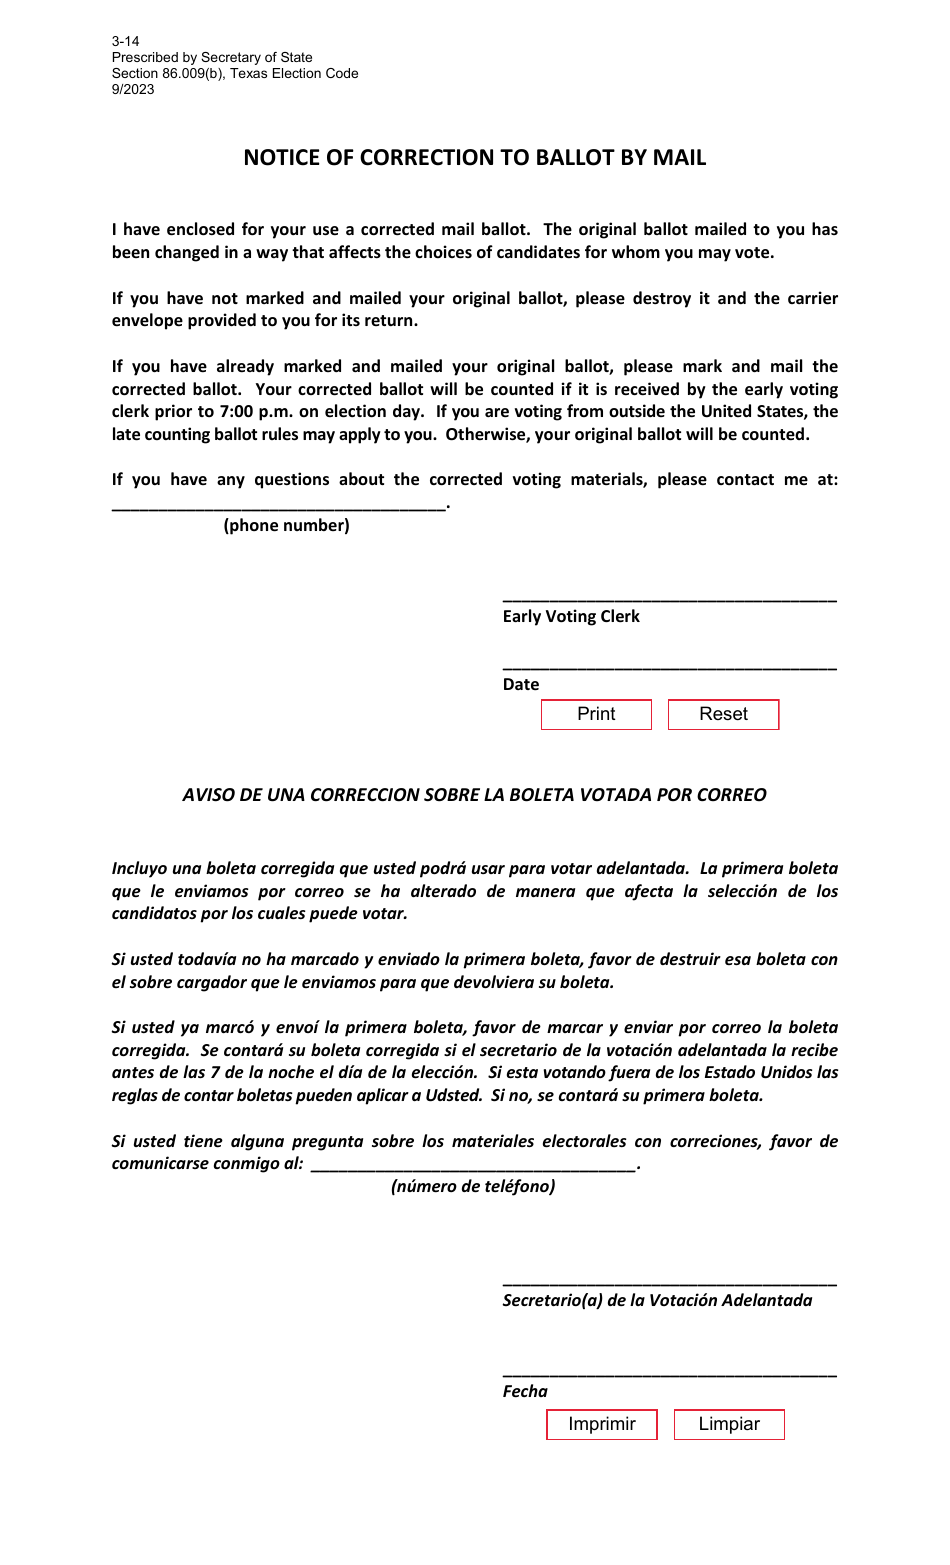 Form 3-14 Notice of Correction to Ballot by Mail - Texas (English / Spanish), Page 1